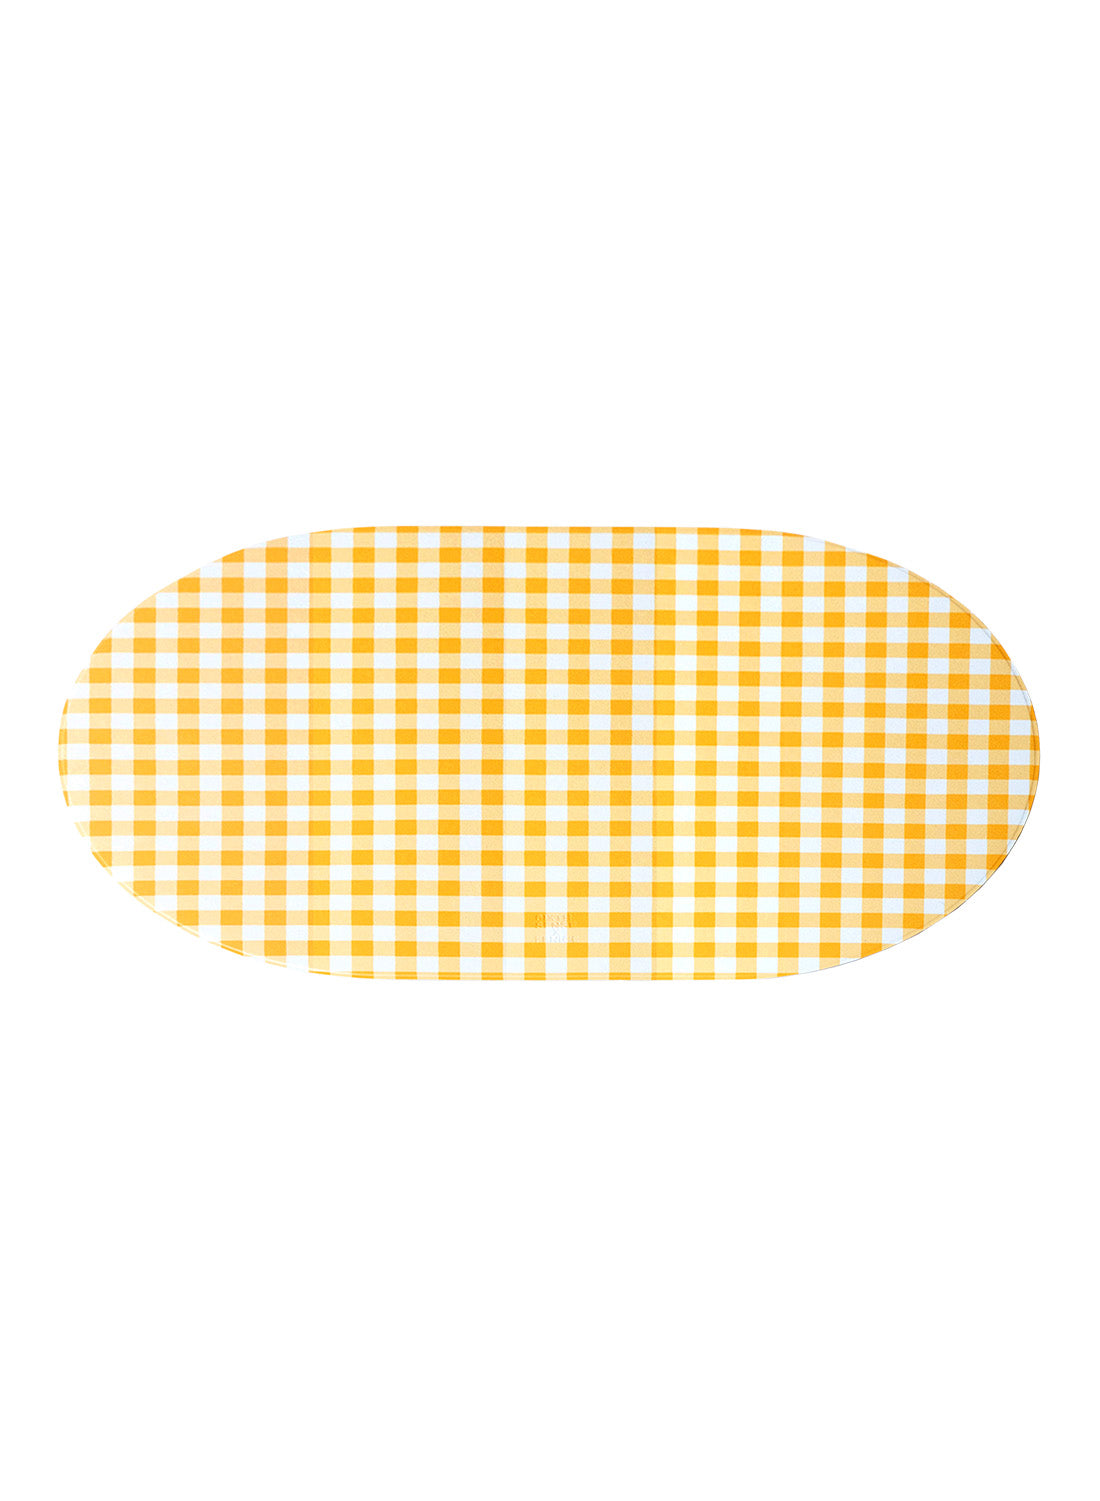 Fenice Gingham Placemat, Yellow